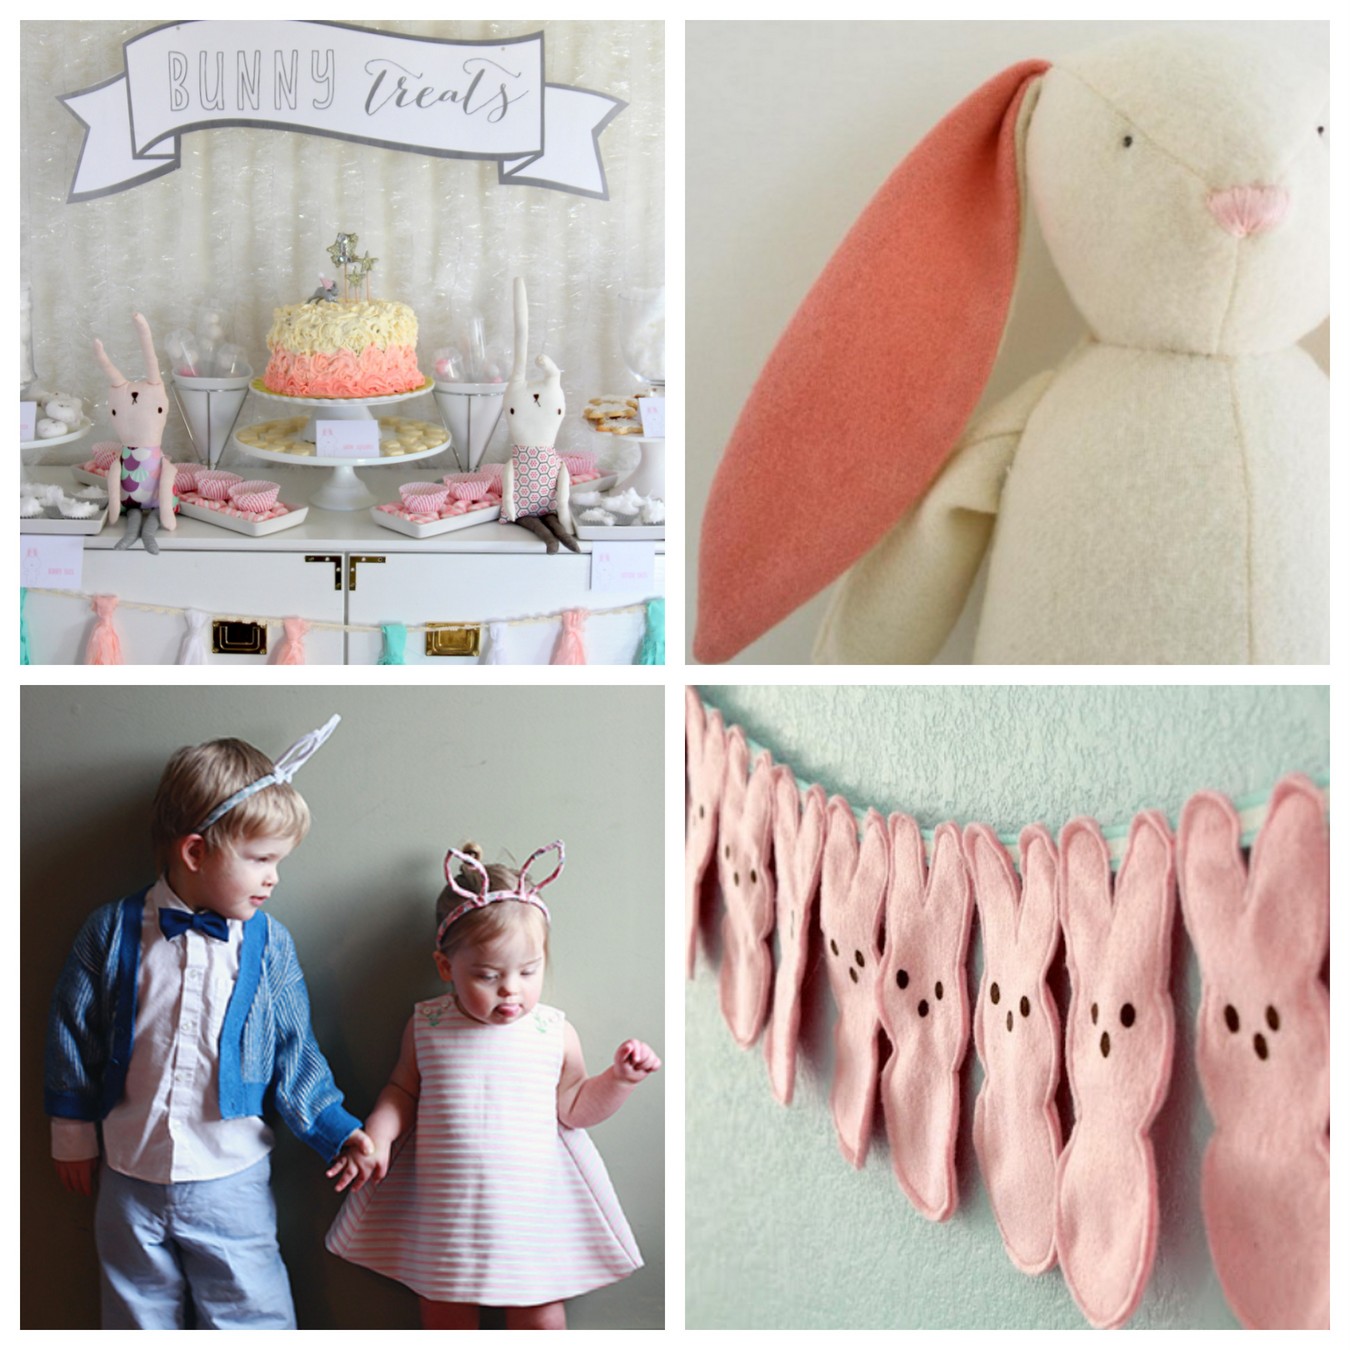 Get ready for easter baskets with these darling DIY bunny projects!